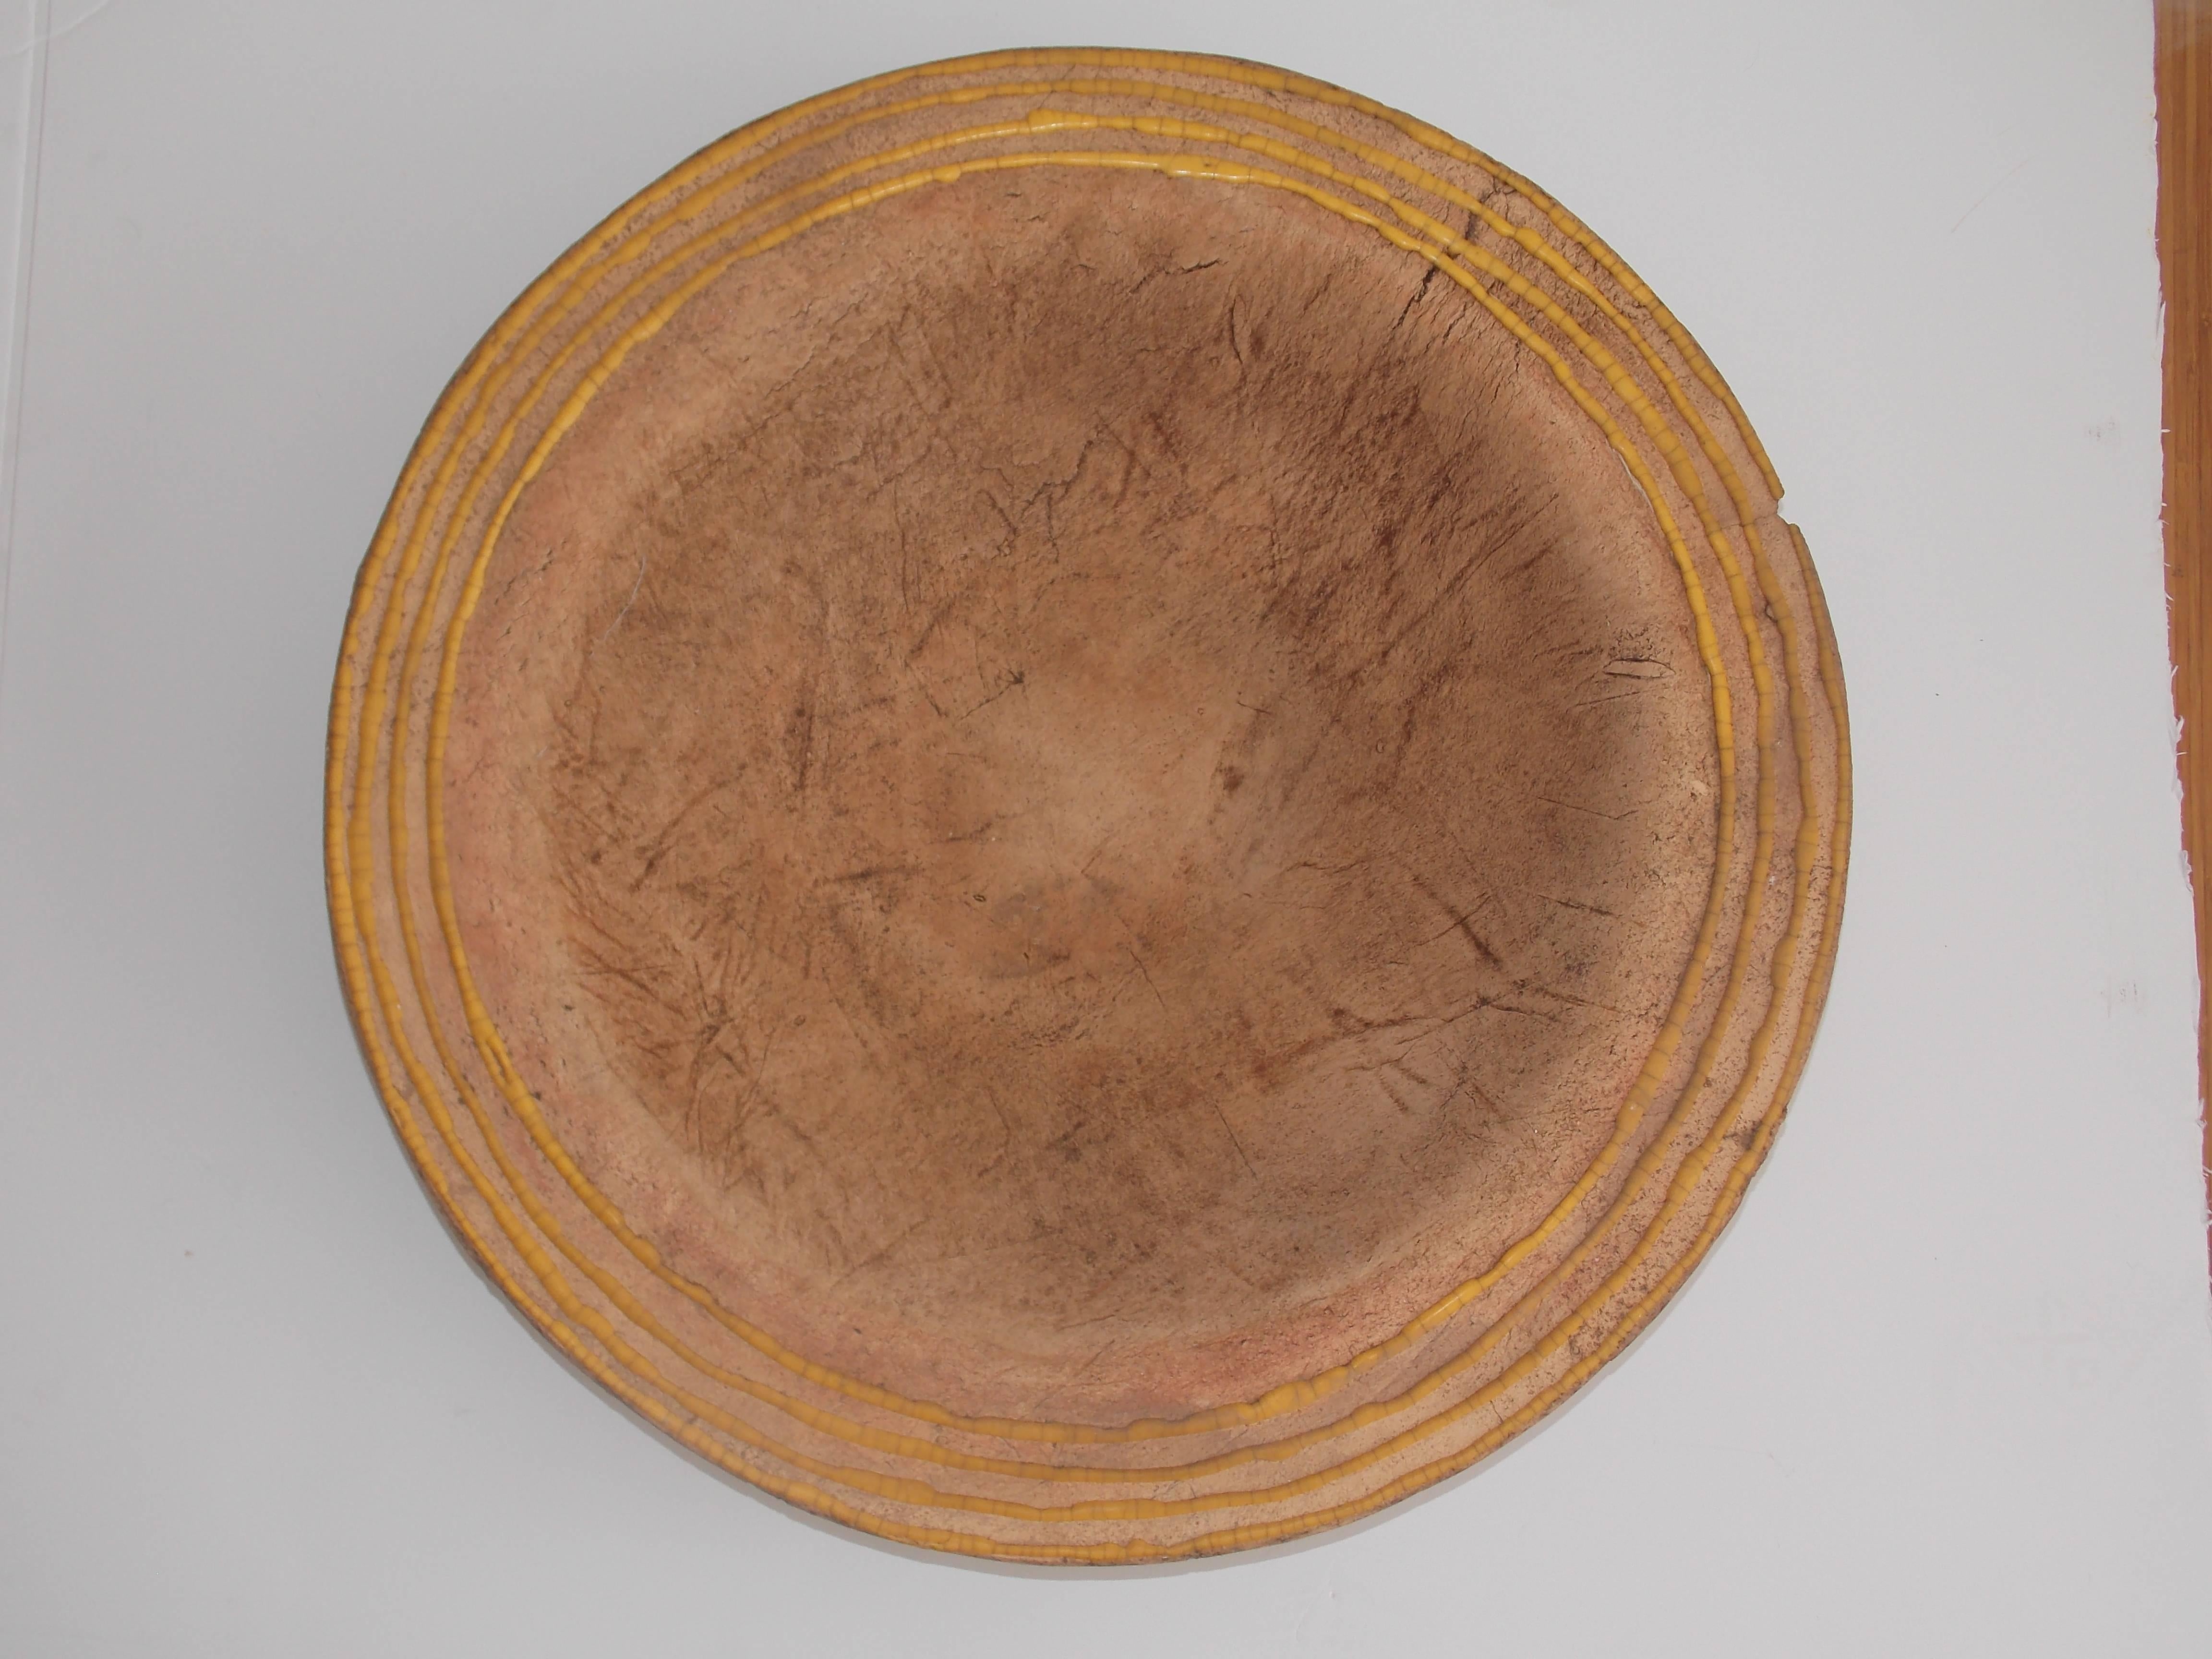 1887-1967.
Mr. Lukens taught at the University of Southern California.
His work was a major influence in the modern pottery design aesthetic, which paved the way for ceramics today. 
This piece is a wheel thrown bowl with natural earthy clay and